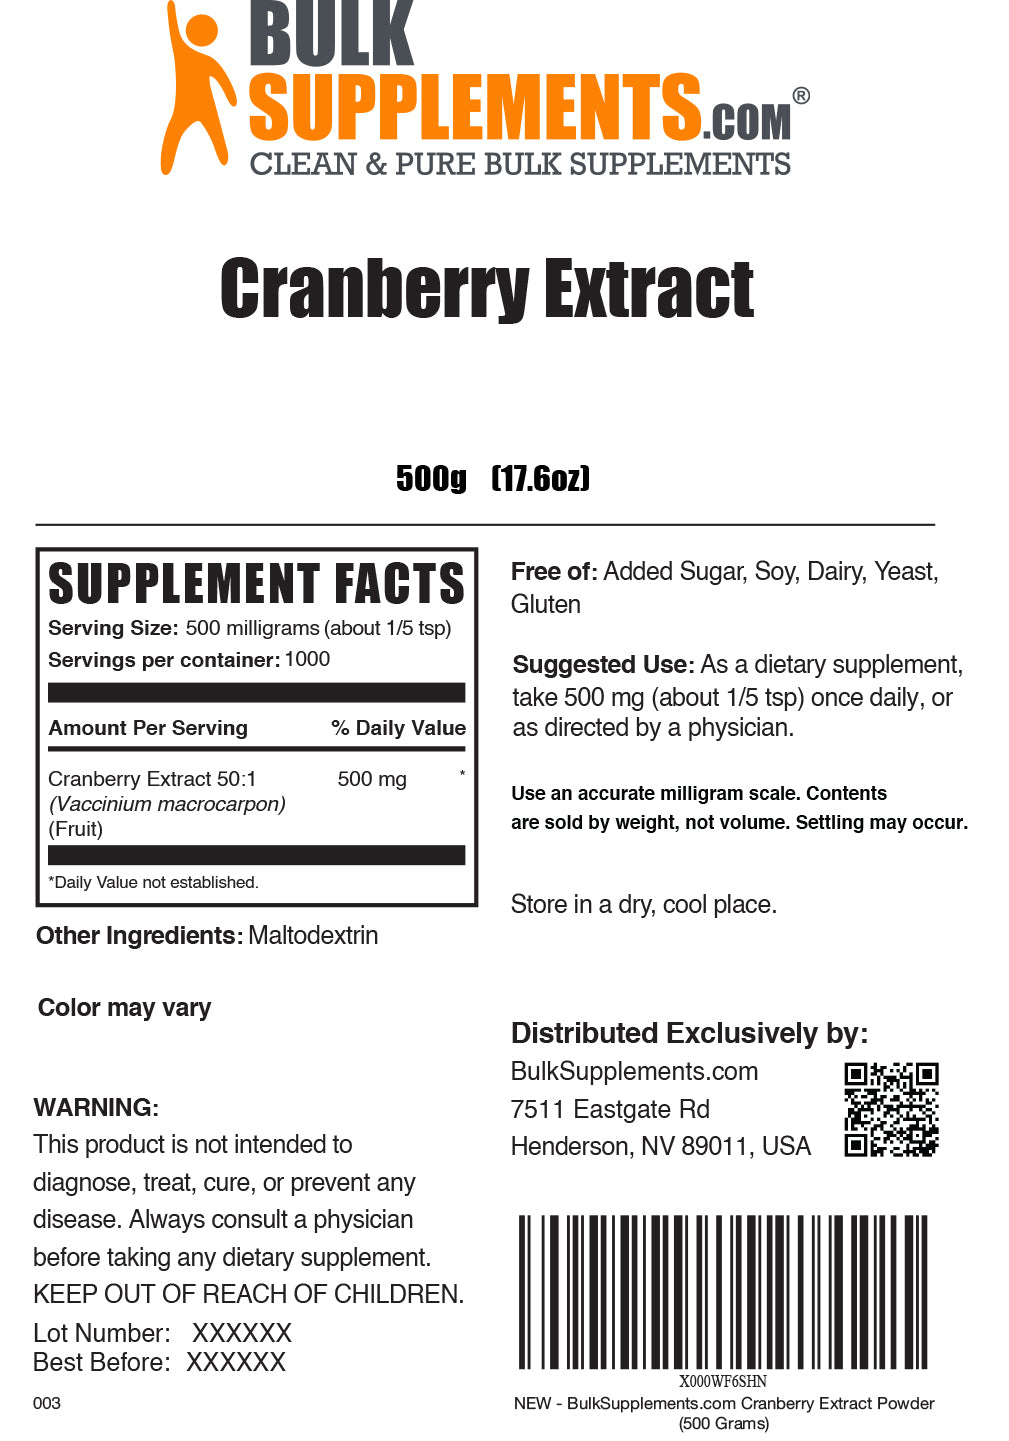 Cranberry Extract powder label 500g